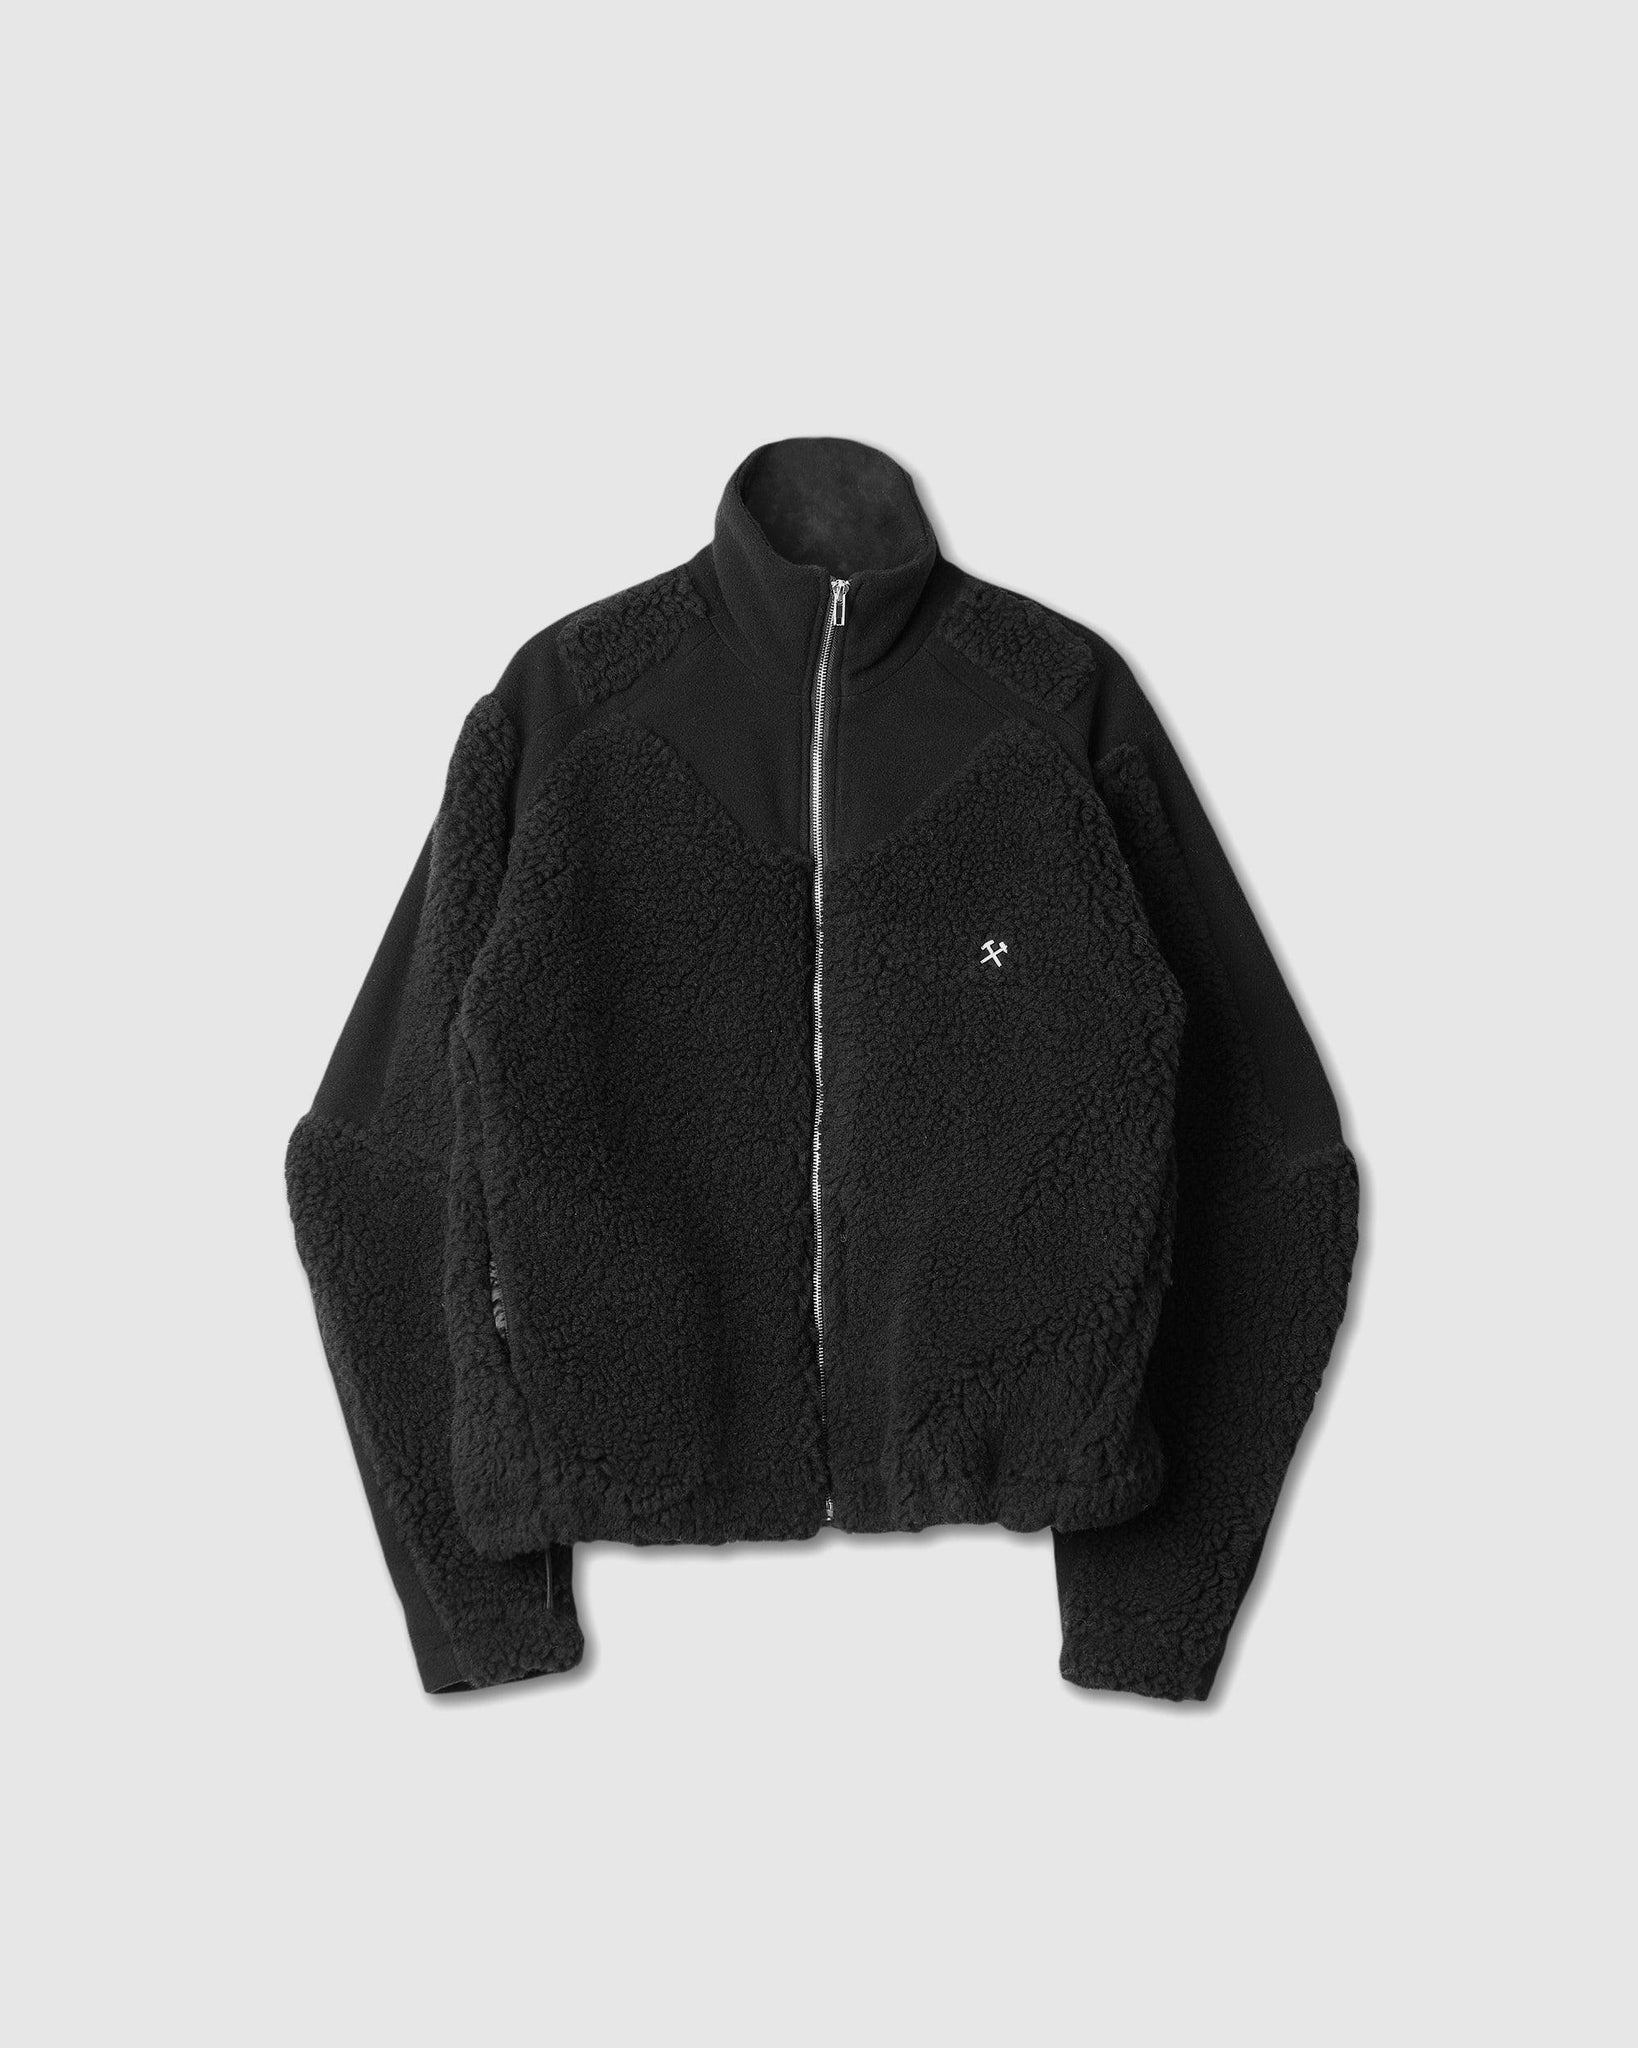 Two-Tone Fleece Jacket Black - {{ collection.title }} - Chinatown Country Club 